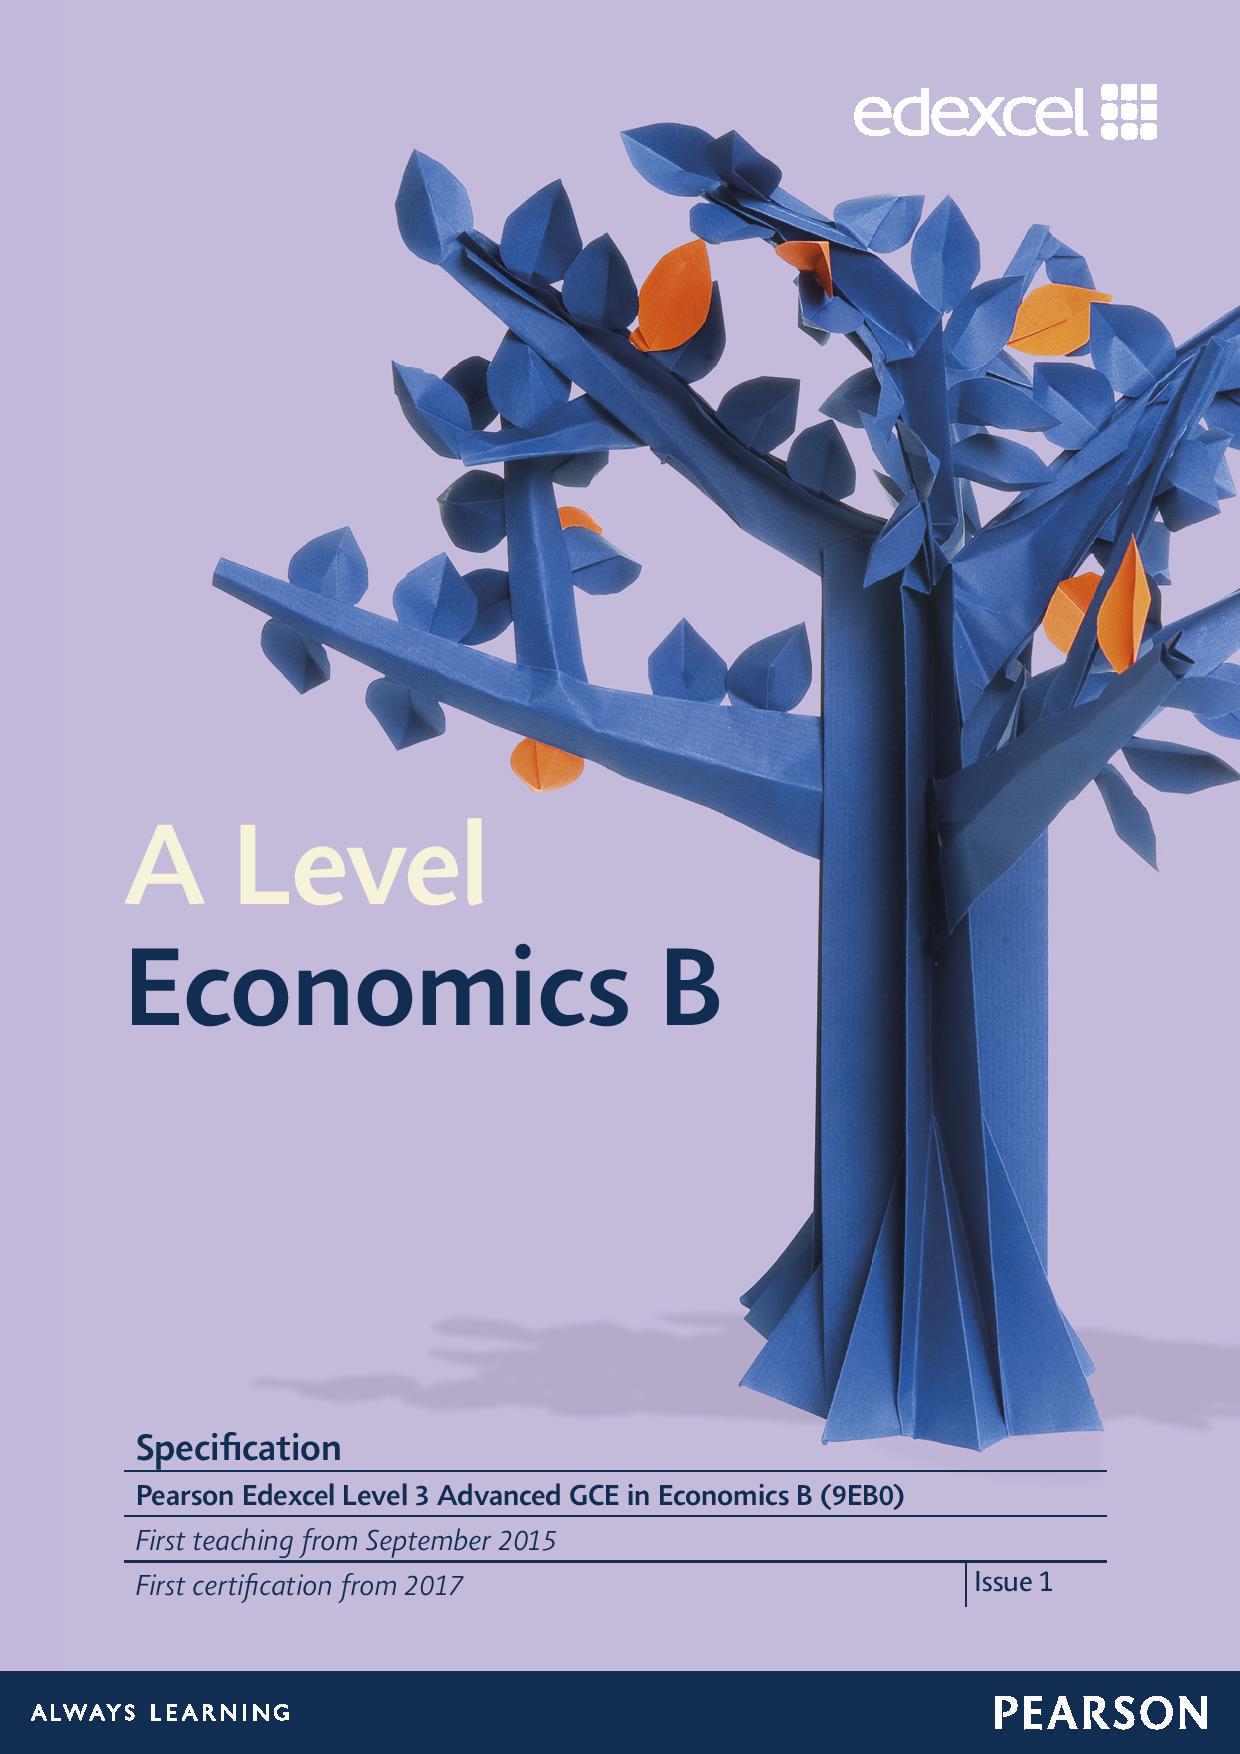 Link to Edexcel A level Economics B  specification page